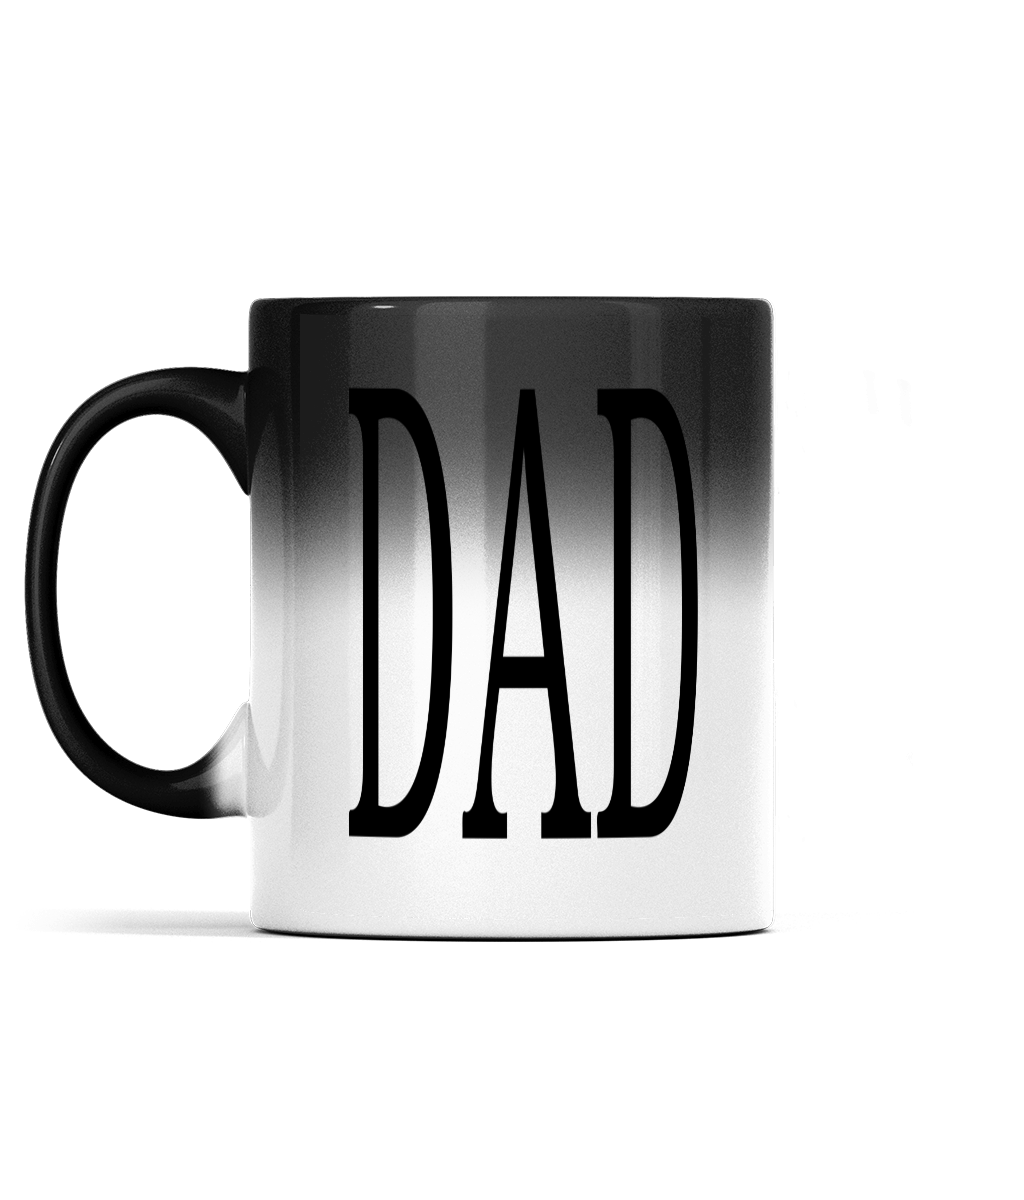 11oz DAD Colour Changing Mug For Tea, Coffee Or Hot Drinks Black Colour When Cold DAD Appears And Turns To White Tea Cup